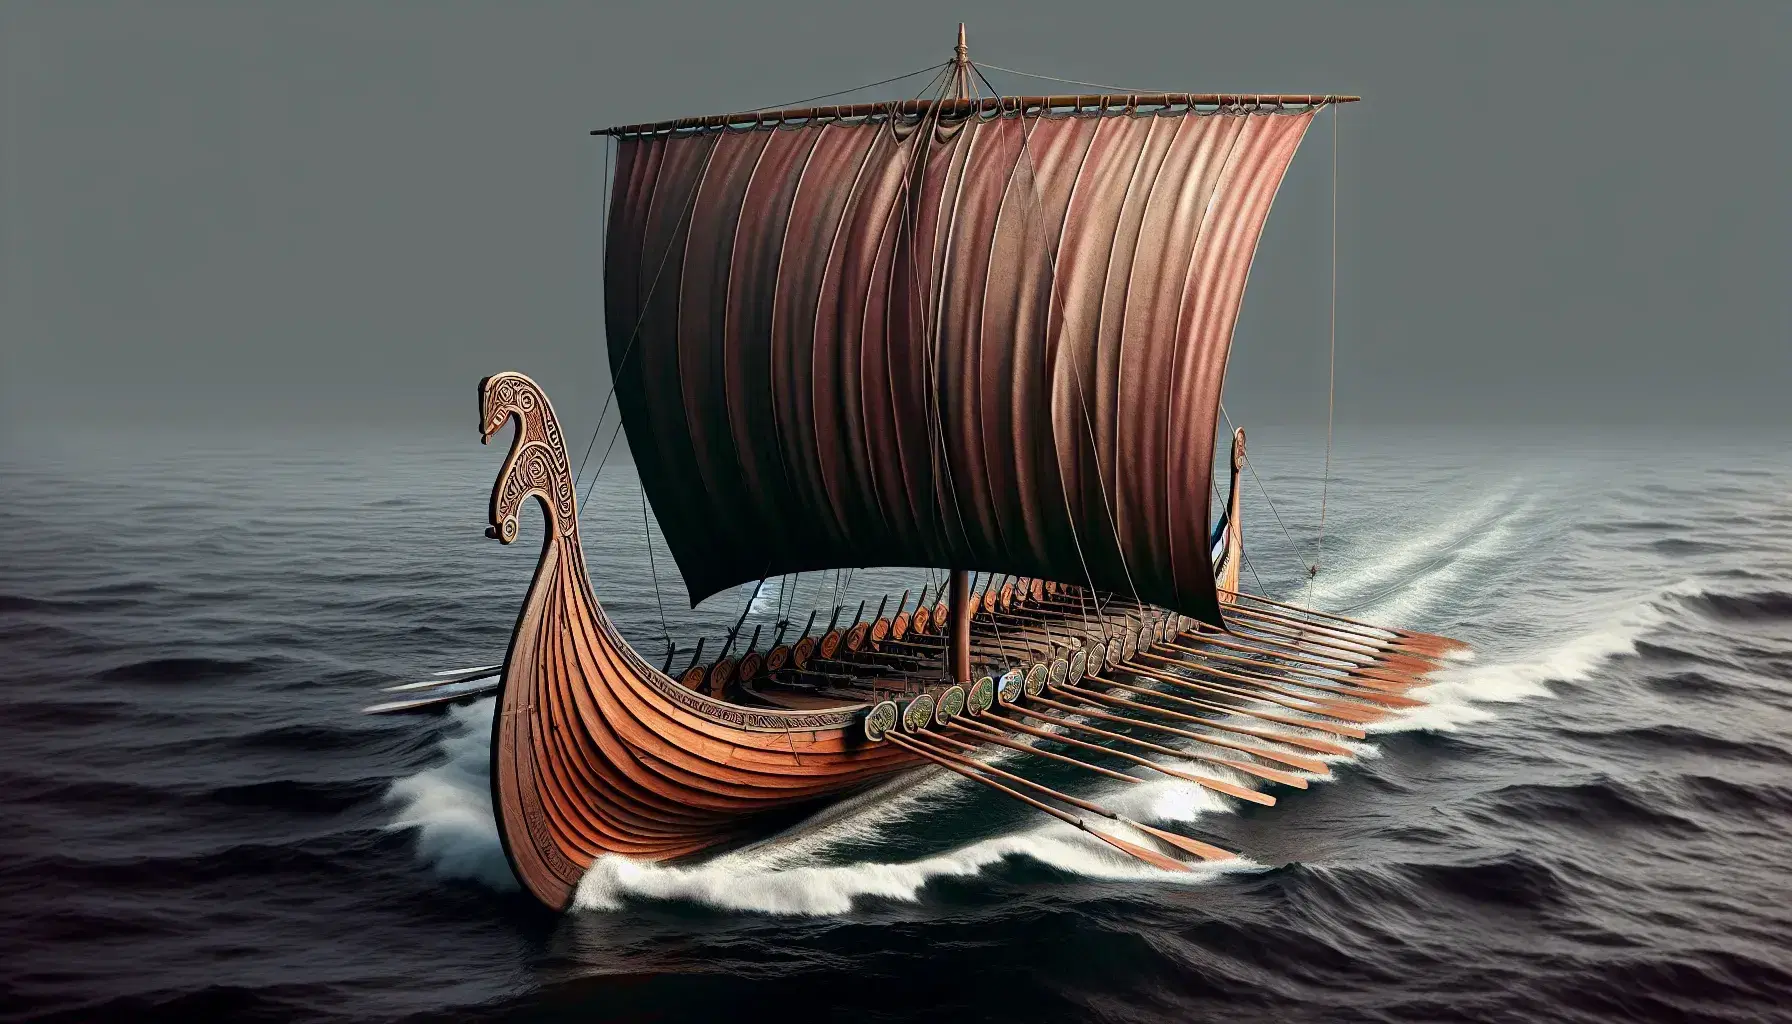 Traditional Viking longship at sea with a red square sail, dragon figurehead, and a backdrop of a calm blue sea and distant green coastline.